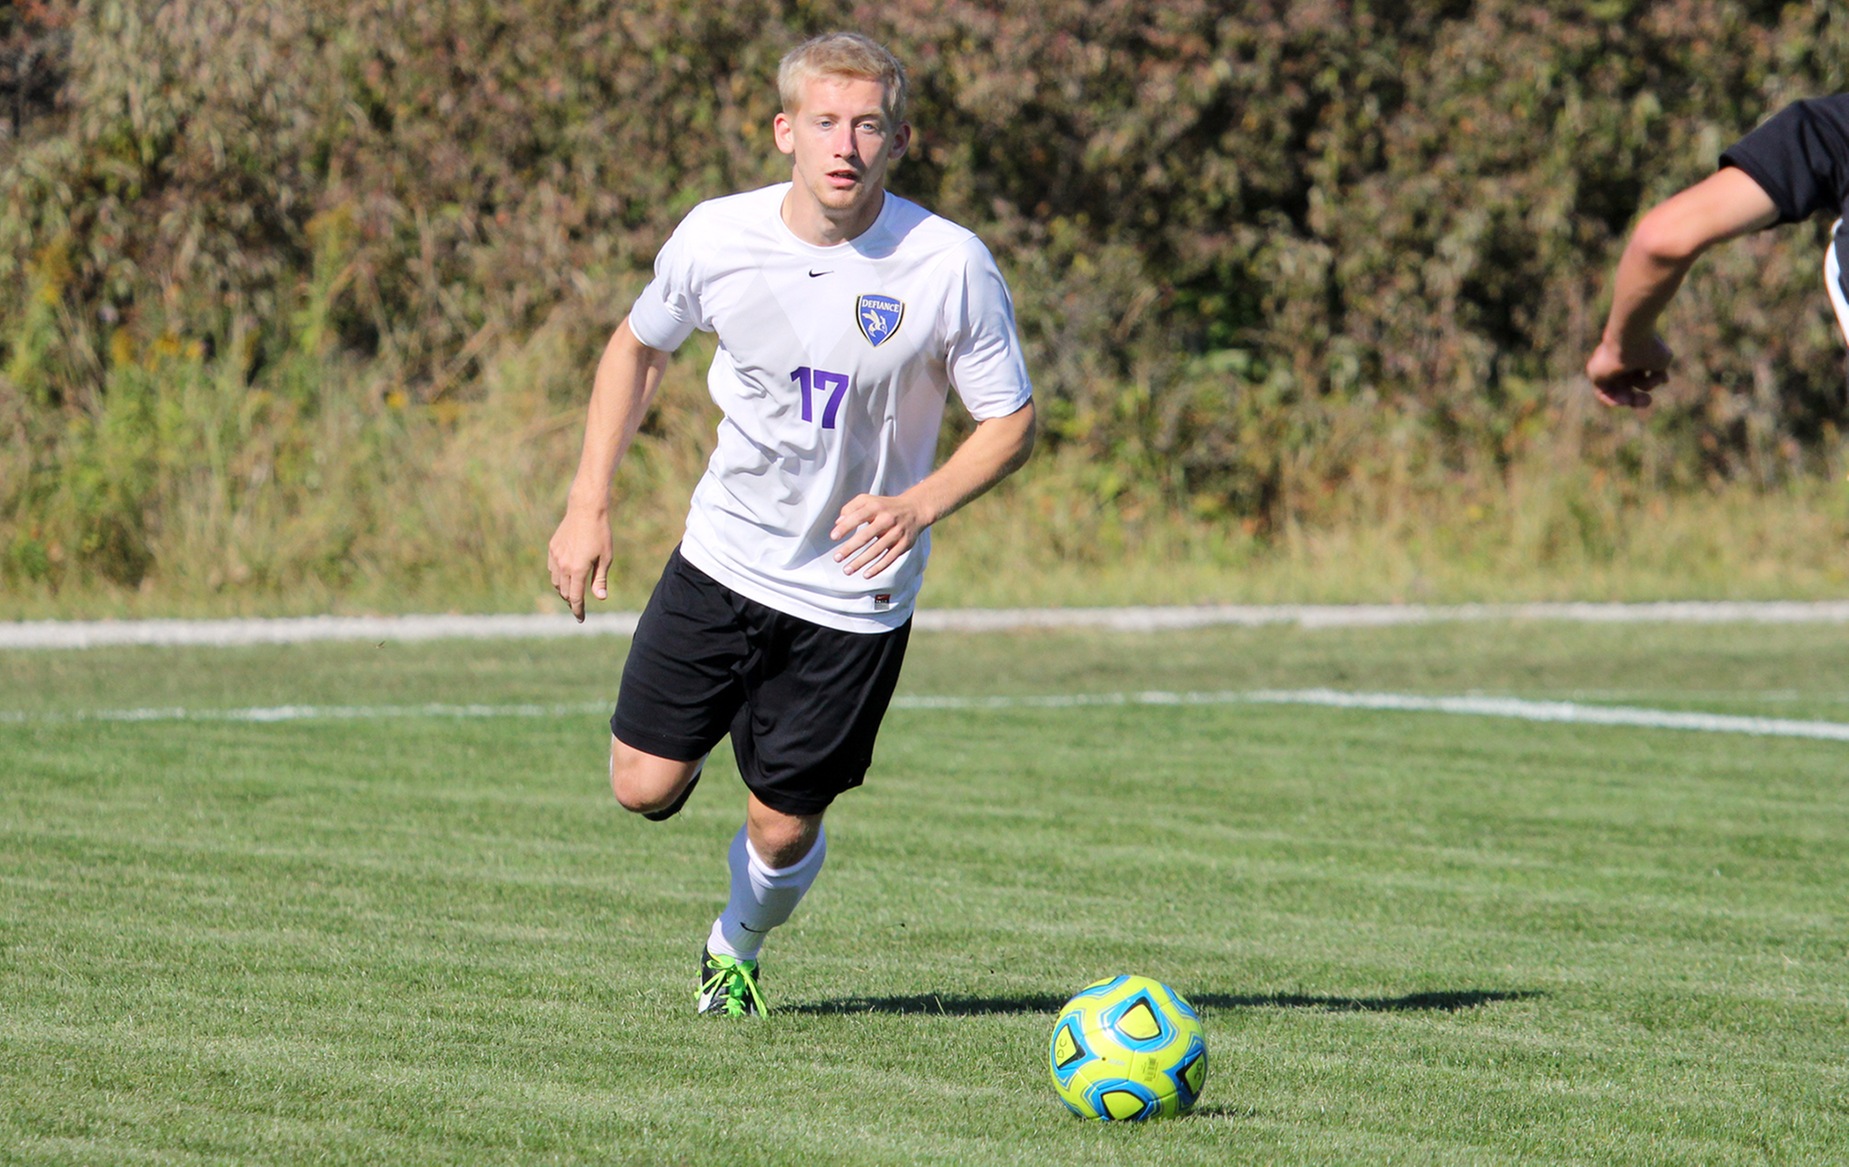 Freels named to 3rd All-Academic team with All-Region selection